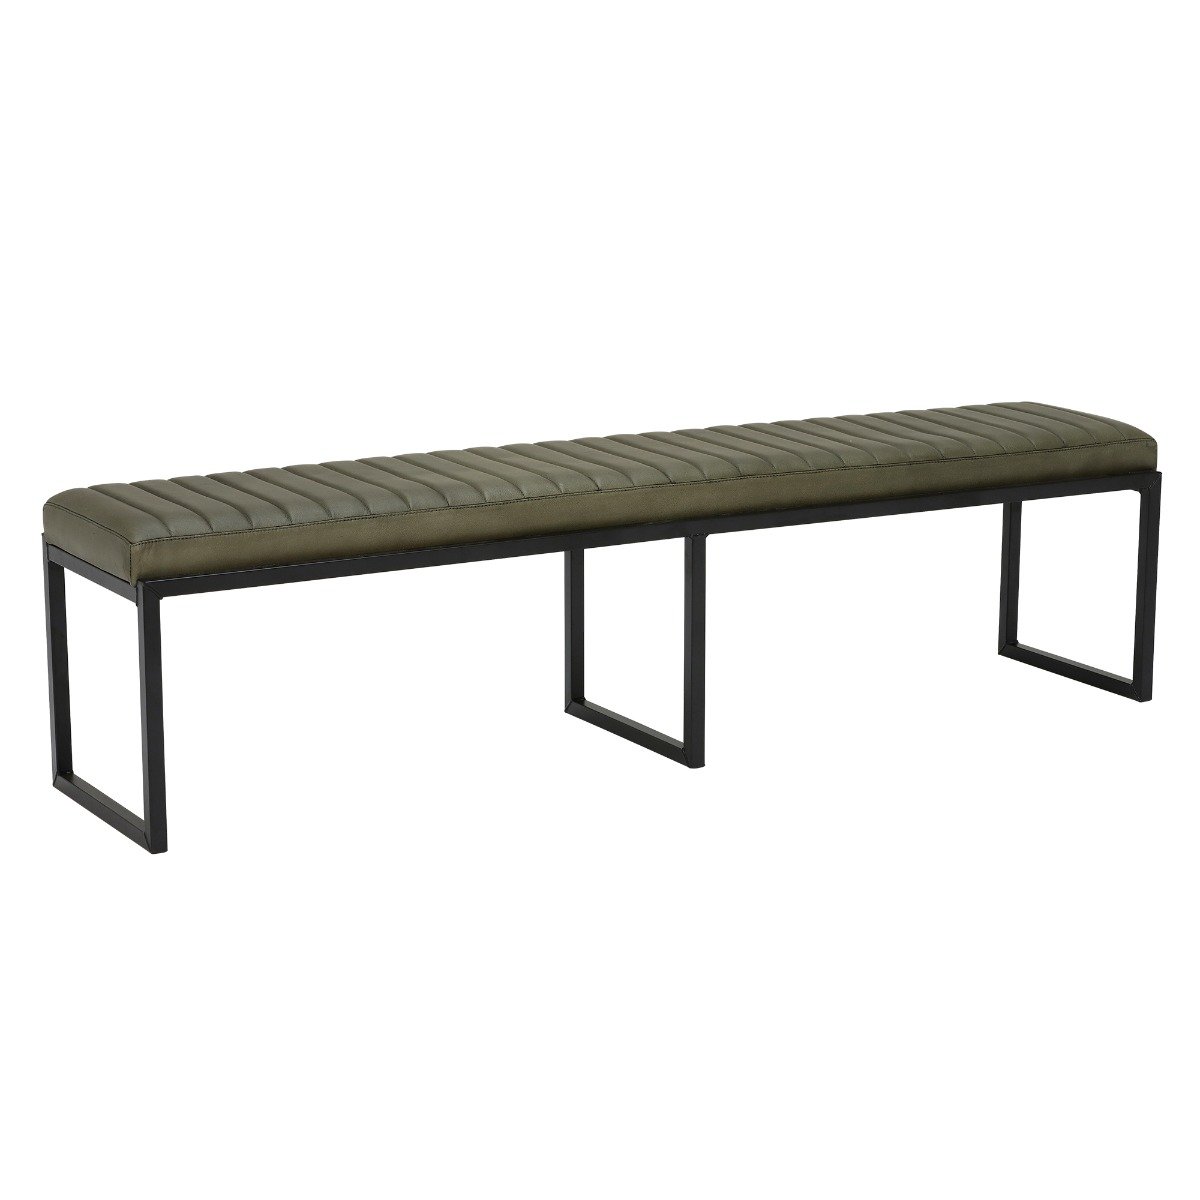 Pure Furniture Brutus Bench 180cm With Matt Black Frame, Green Leather | Barker & Stonehouse